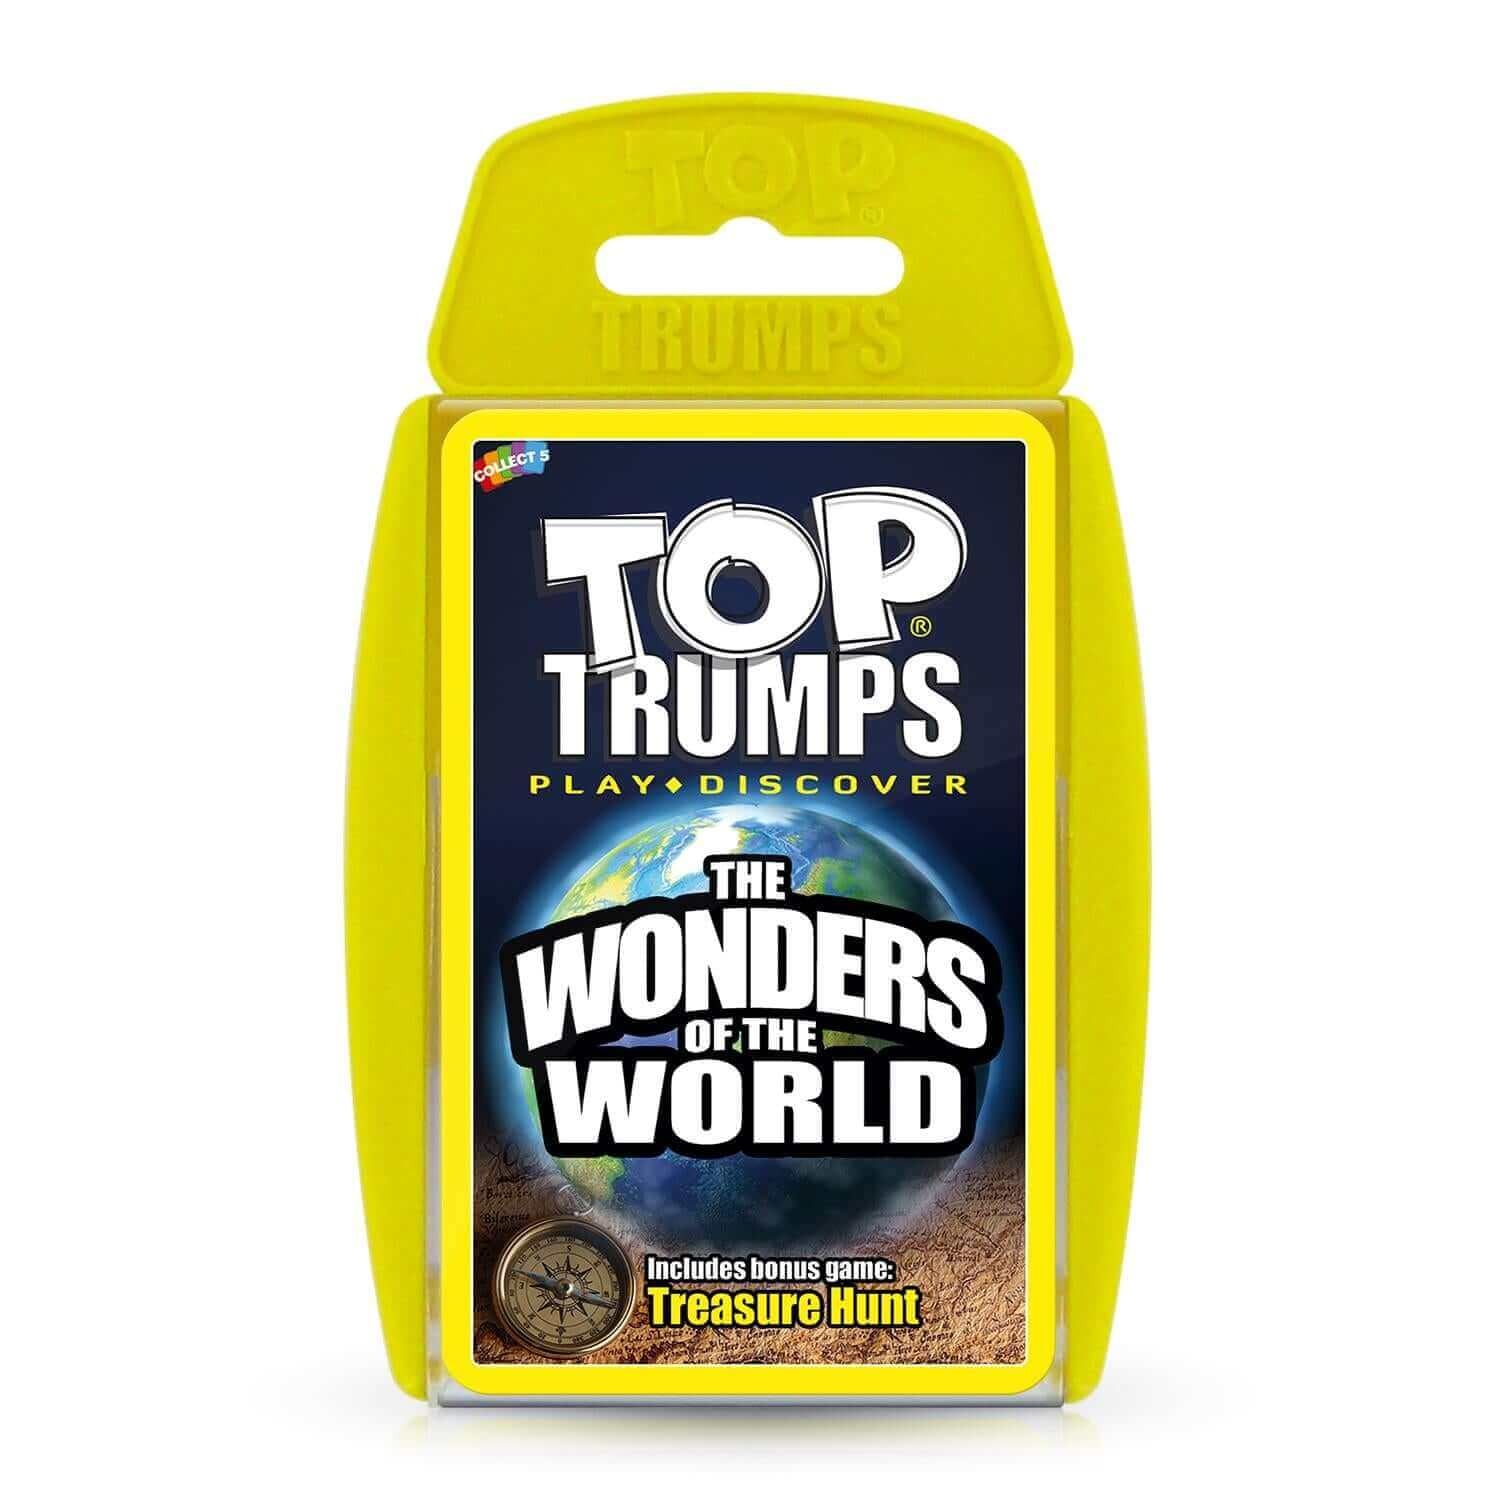 Top Trumps Card Game Wonders of the World